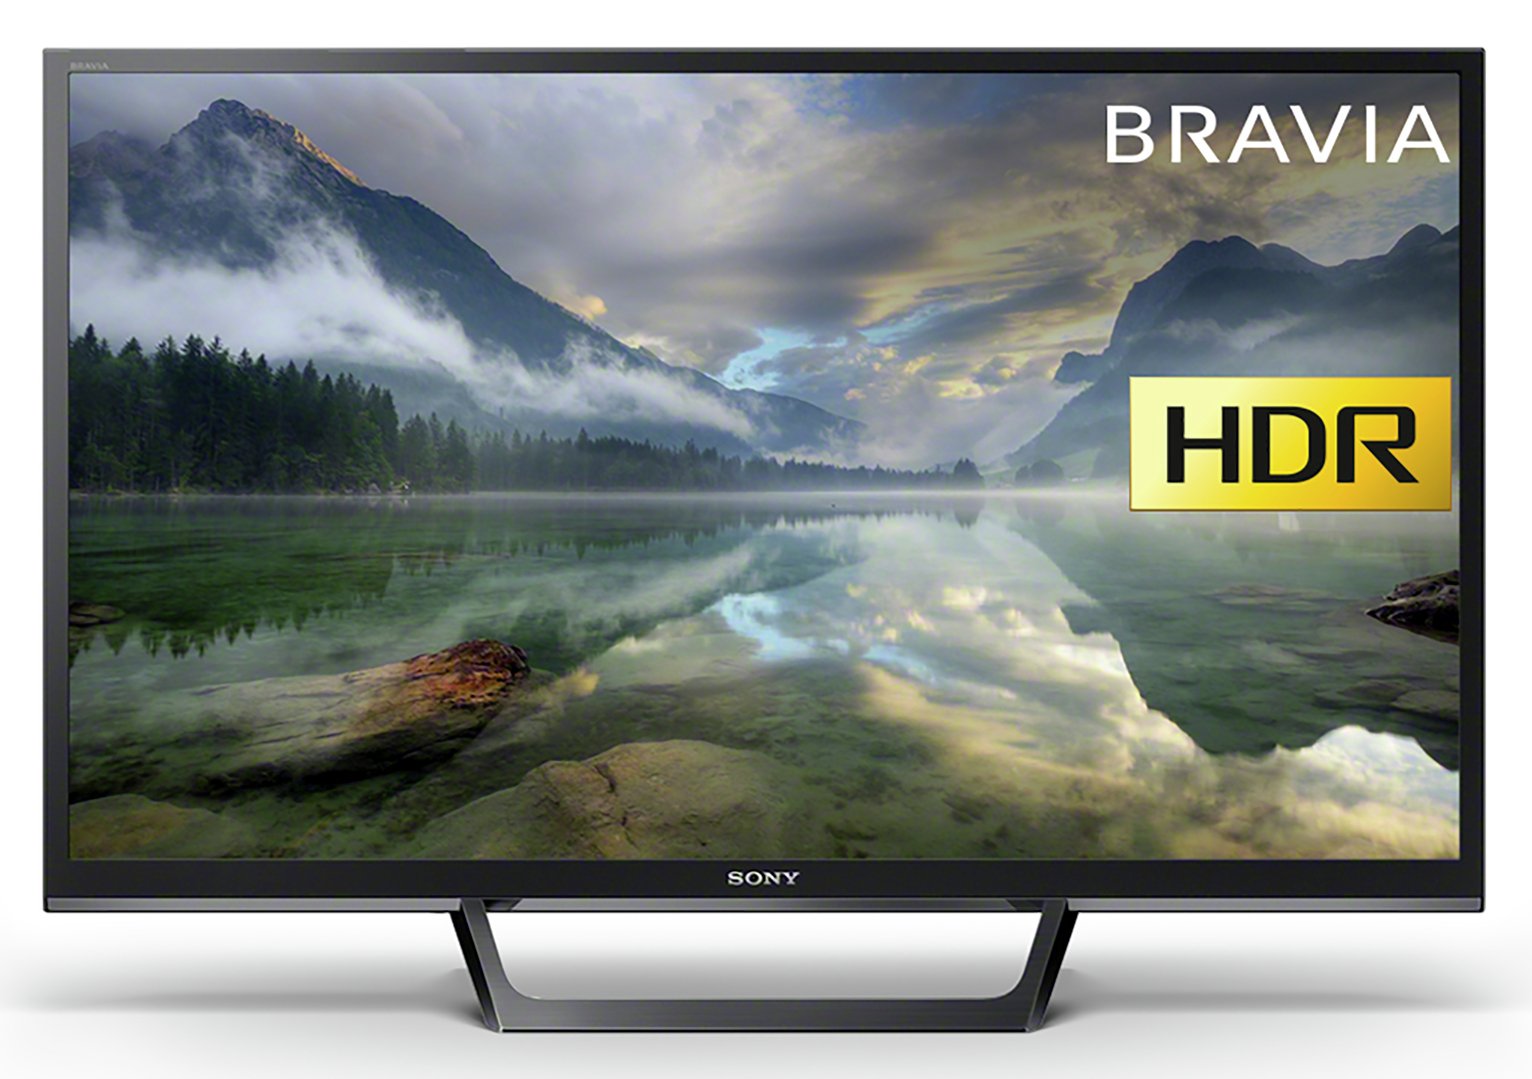 Sony Bravia Kdl32we613bu 32 Inch Smart Hd Ready Tv With Hdr Reviews